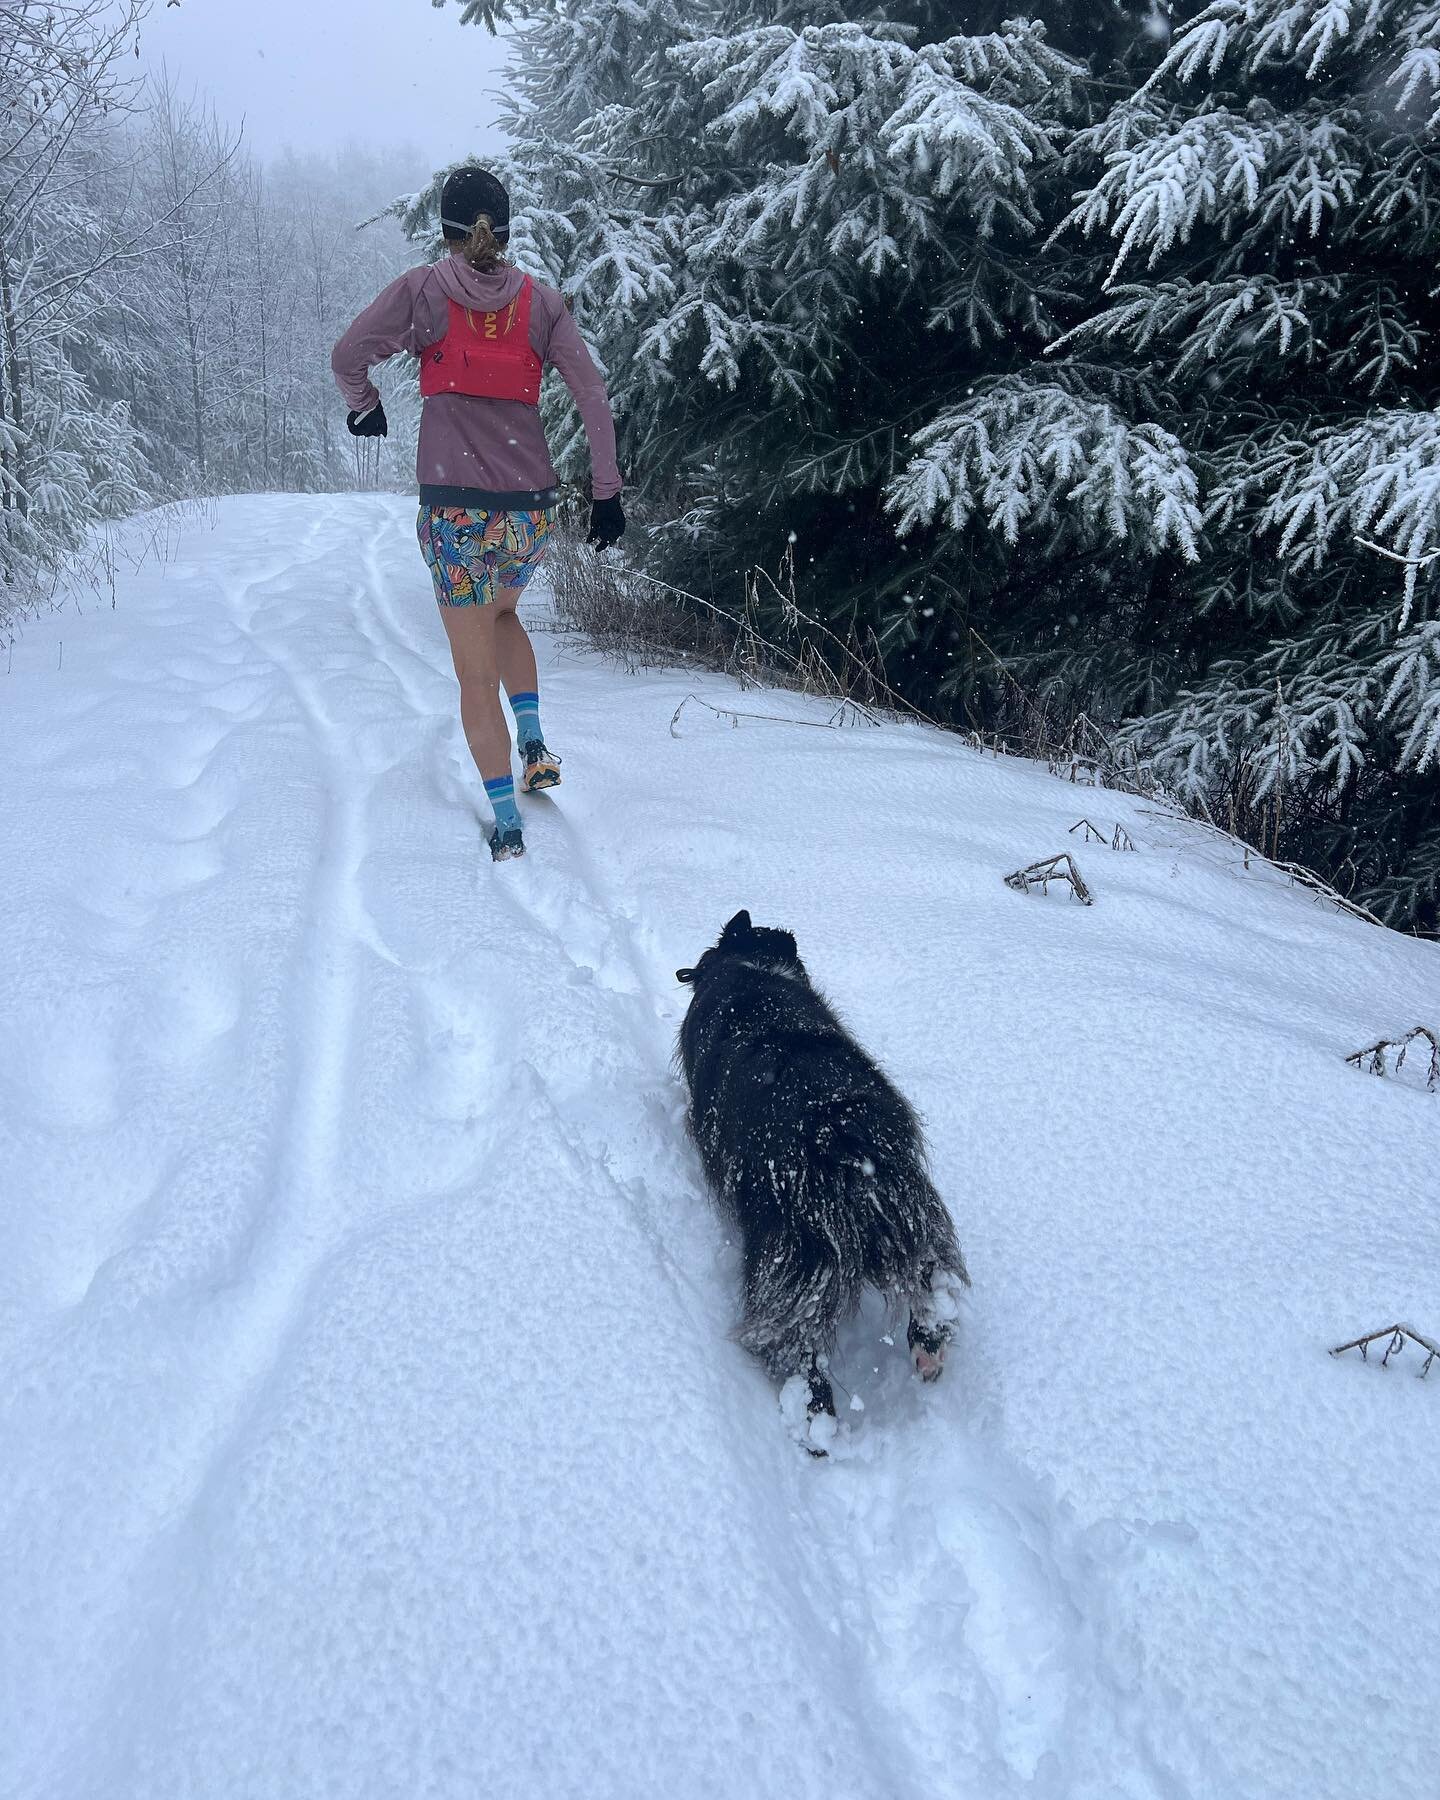 Big difference in conditions compared to the Flatlanders Canyon Crush last weekend (☀️&amp; 80!). This is topping out on Burnout Rd so not far from South Lost Lake Trail (aka @chuckanut50 course). We are 2 weeks out from race day!! What will conditio